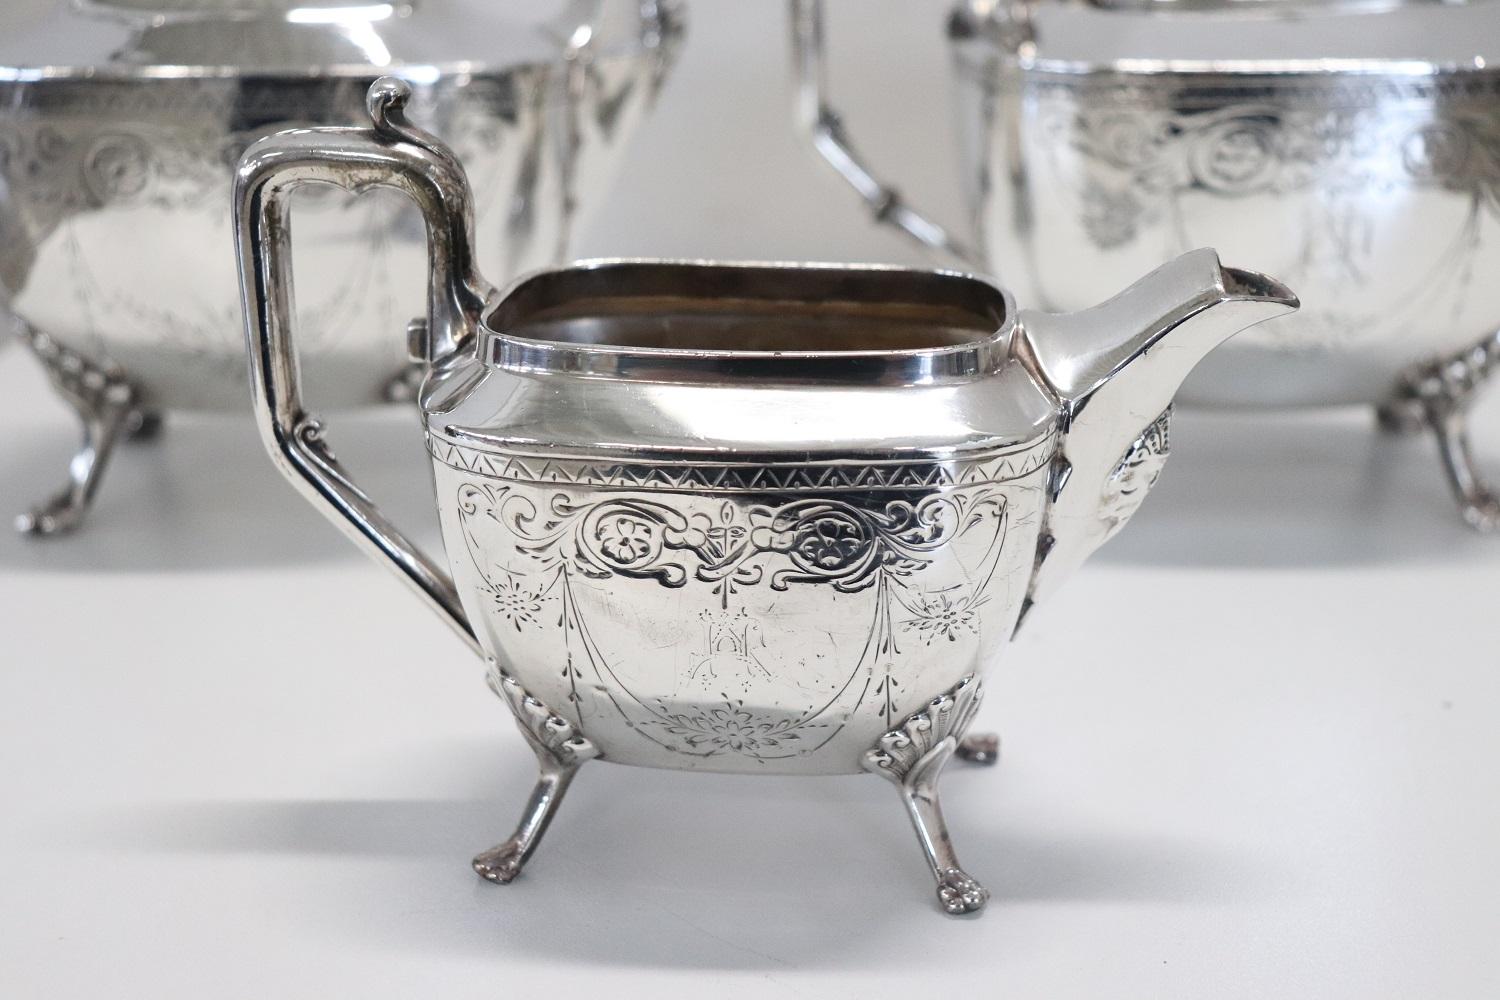 Beautiful late 19th century silver plate tea and coffee set. Refined finely chiseled decorations. Mark Reed & Barton. Perfect for embellishing a table with class.